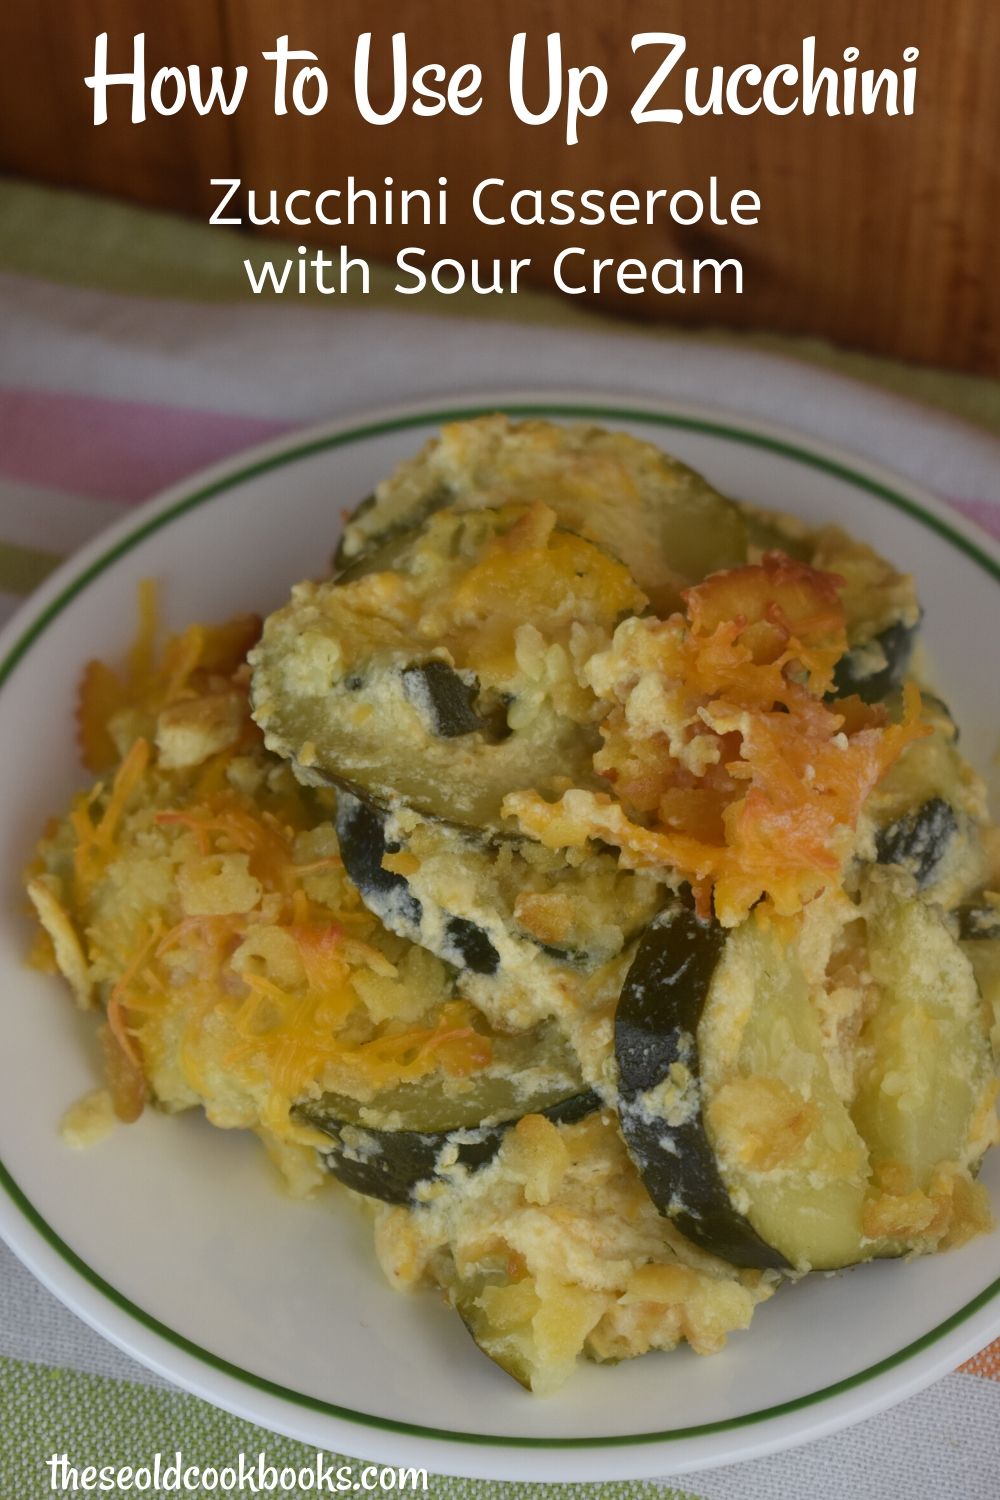 Sour Cream Zucchini Casserole is an easy side dish that combines a creamy, cheesy zucchini base with a crunchy Ritz cracker topping.